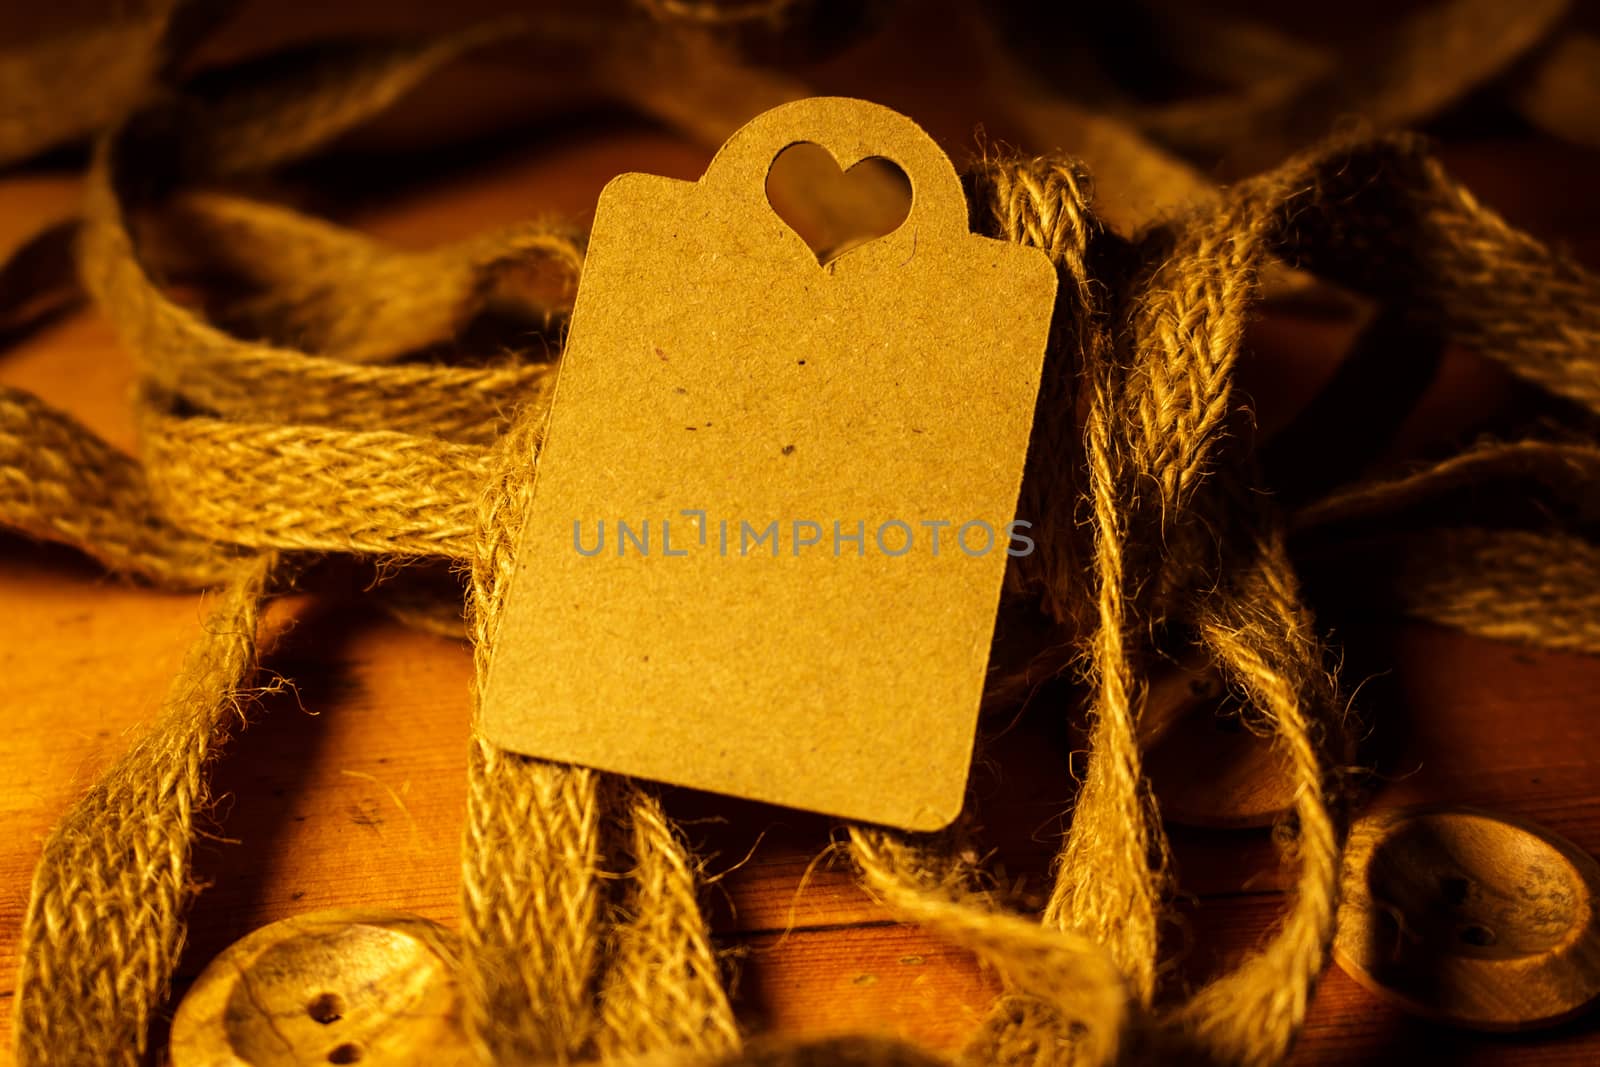 Rectangle Heart Shaped Valentines day gift card tag on wooden background with vintage rustic twine and old buttons